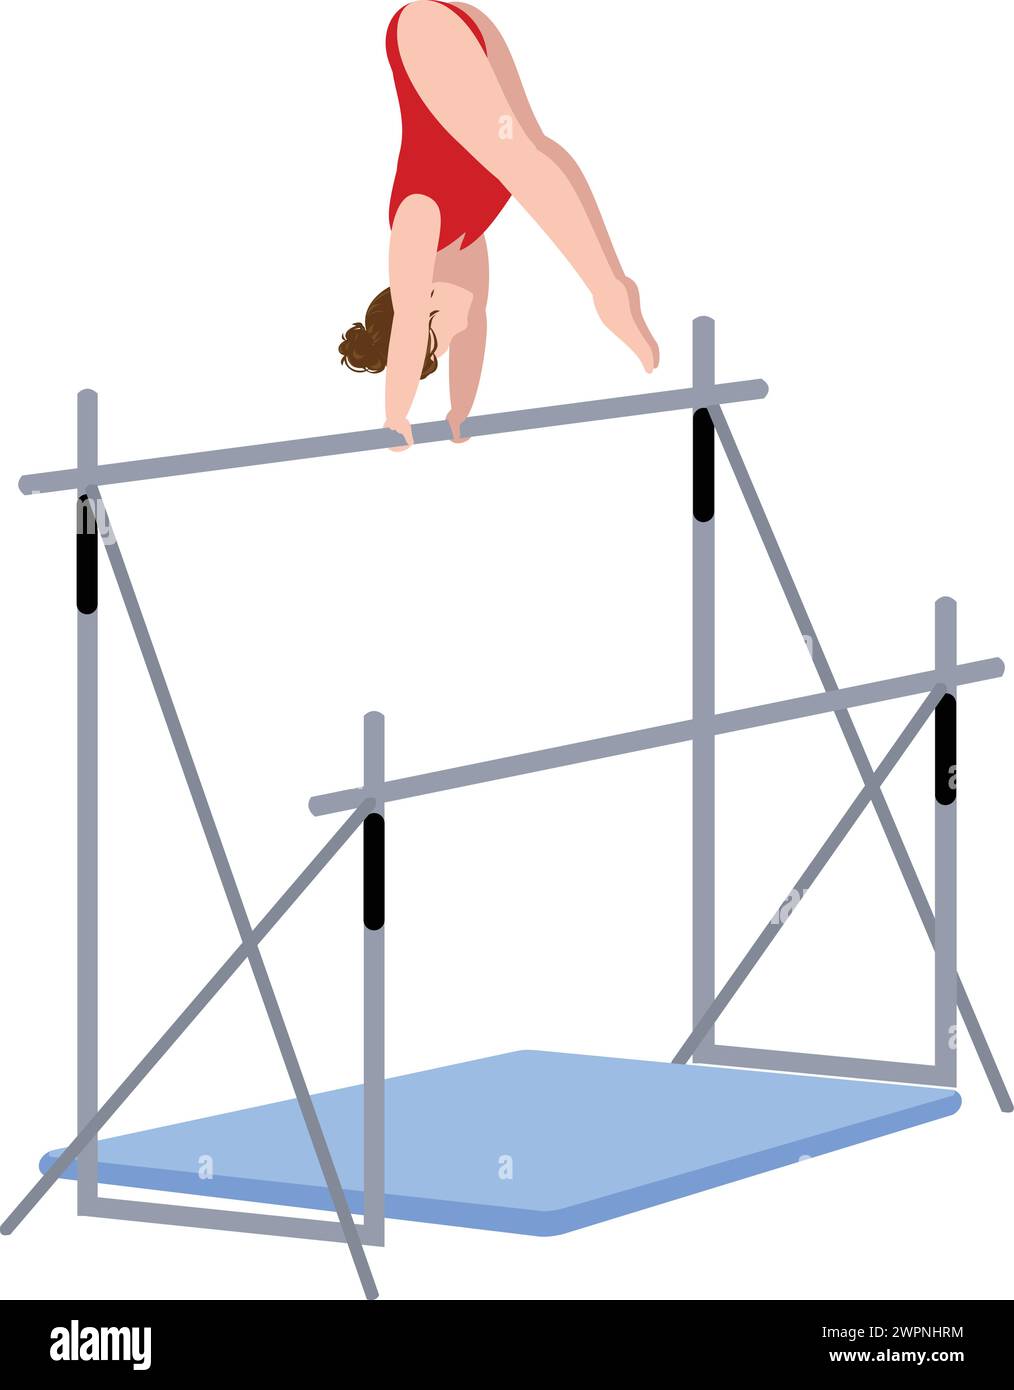 Bars gymnastic equipment icon cartoon vector. Workout training. Sport female person Stock Vector